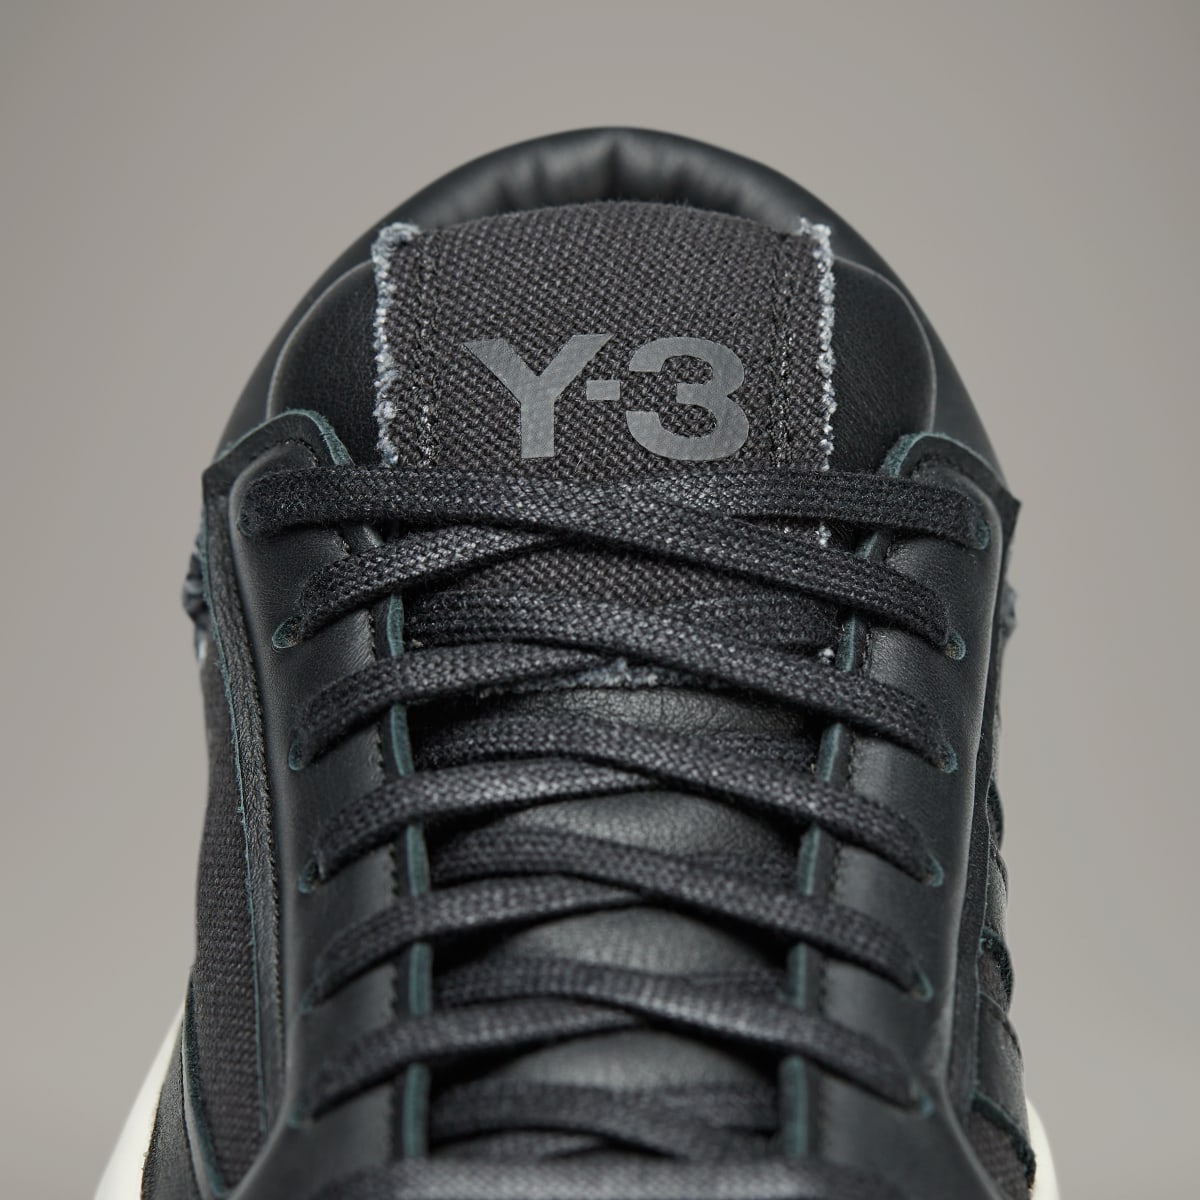 Adidas Y-3 Centennial Low Shoes. 8